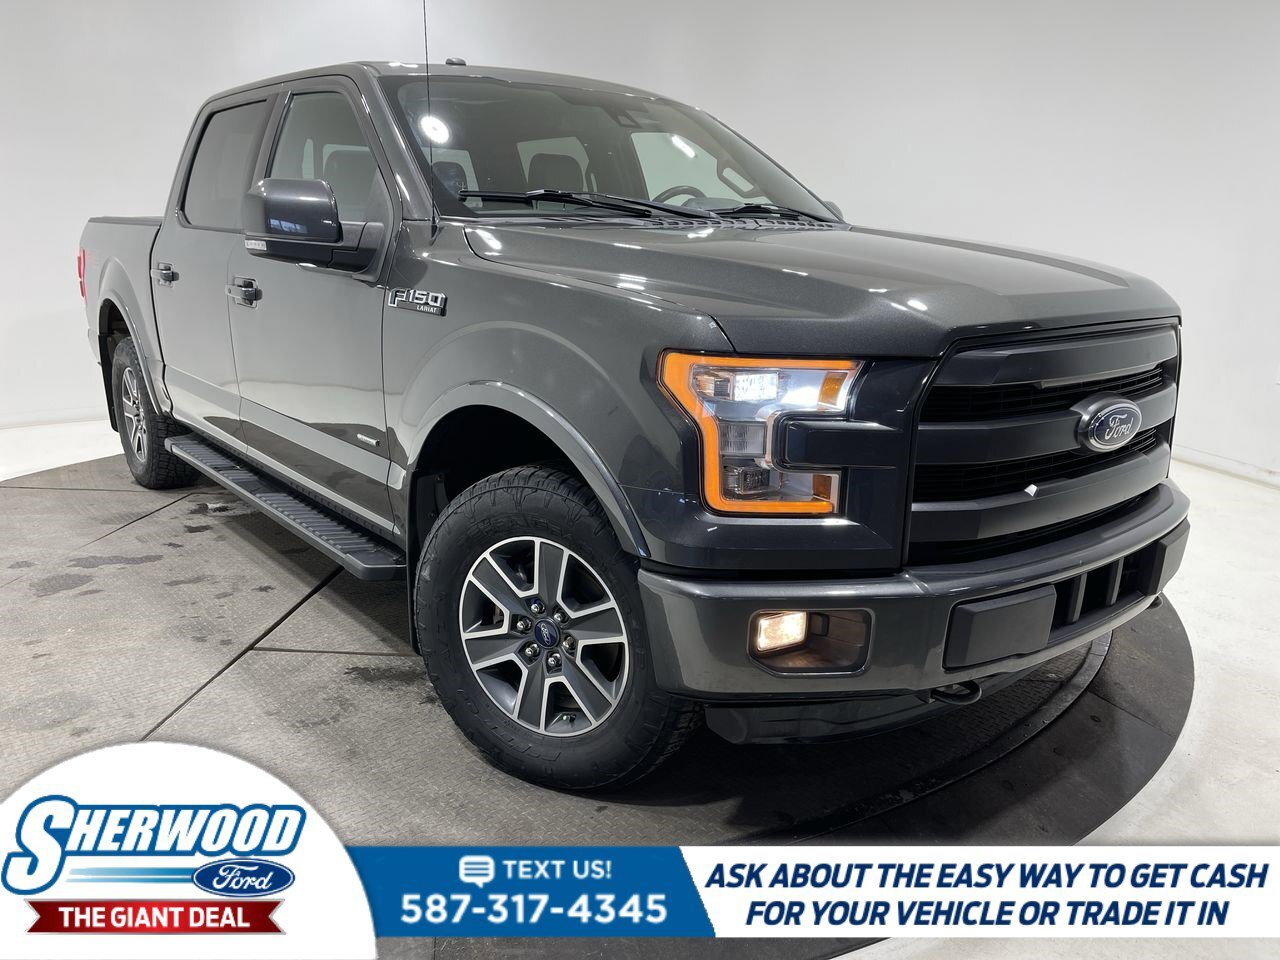 2016 Ford F-150 Lariat- $0 Down $191 Weekly- CLEAN CARFAX